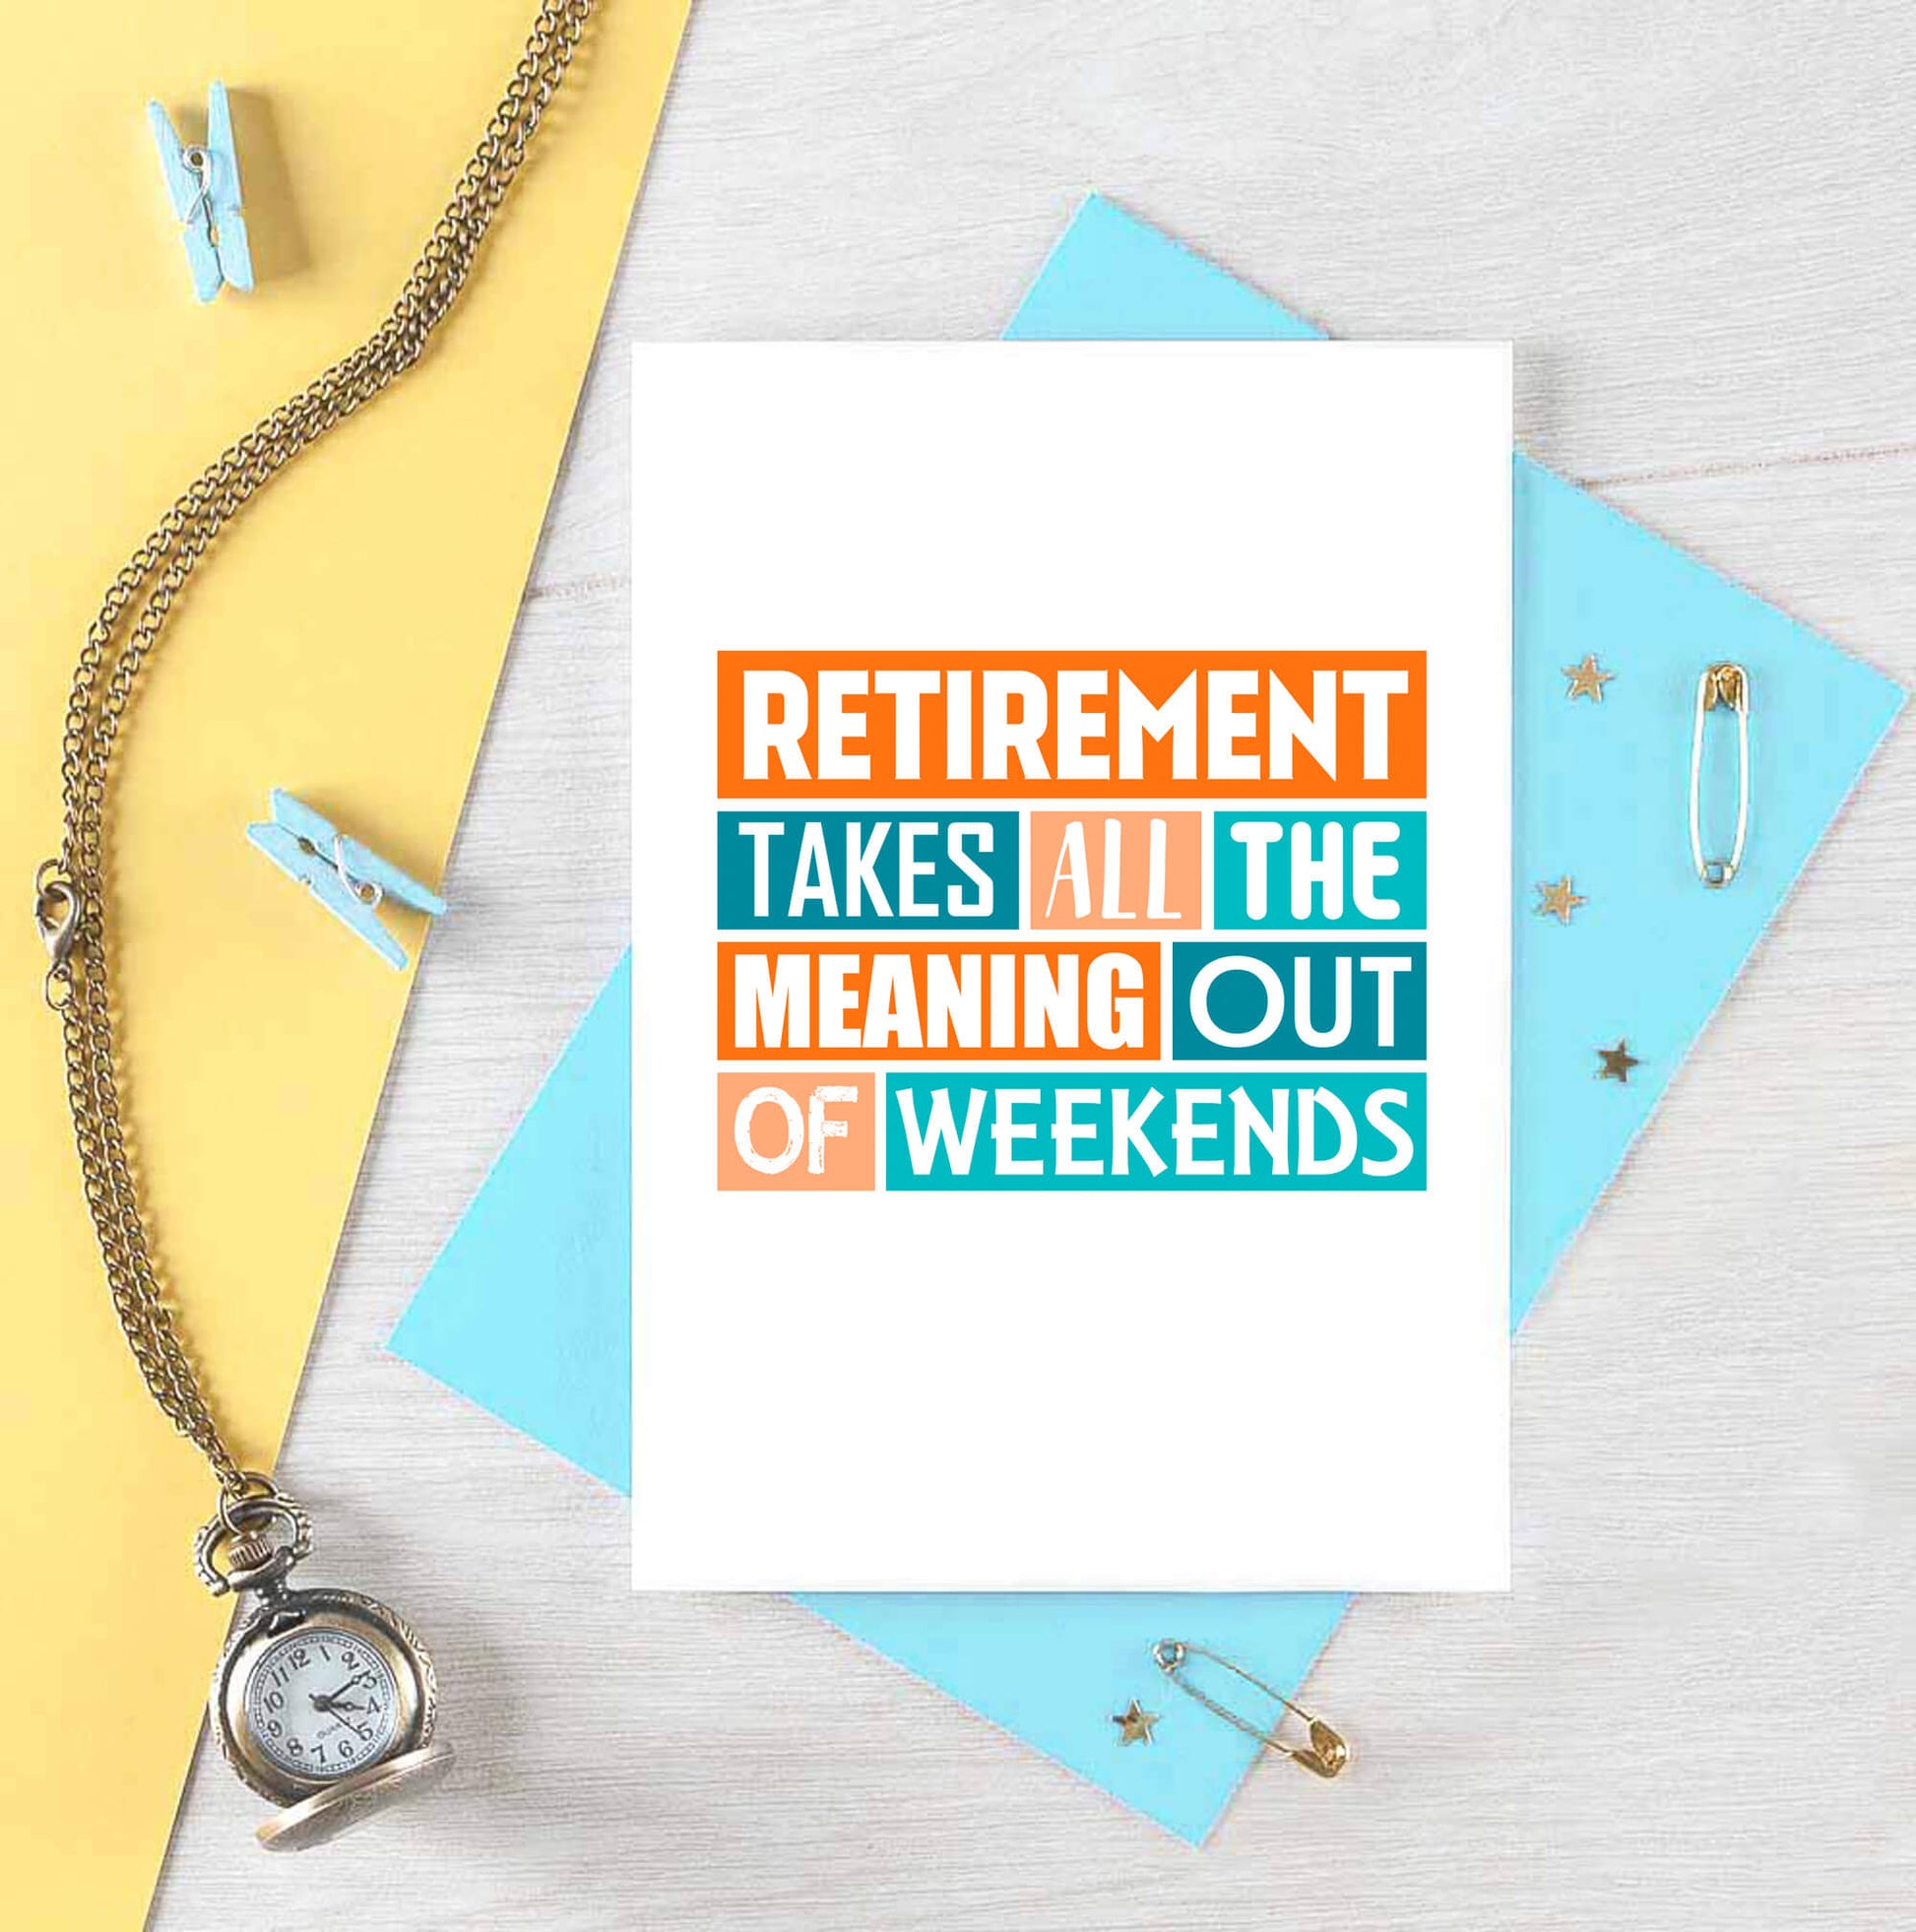 Retirement Card by SixElevenCreations. Reads Retirement takes all the meaning out of weekends. Product Code SE0220A6